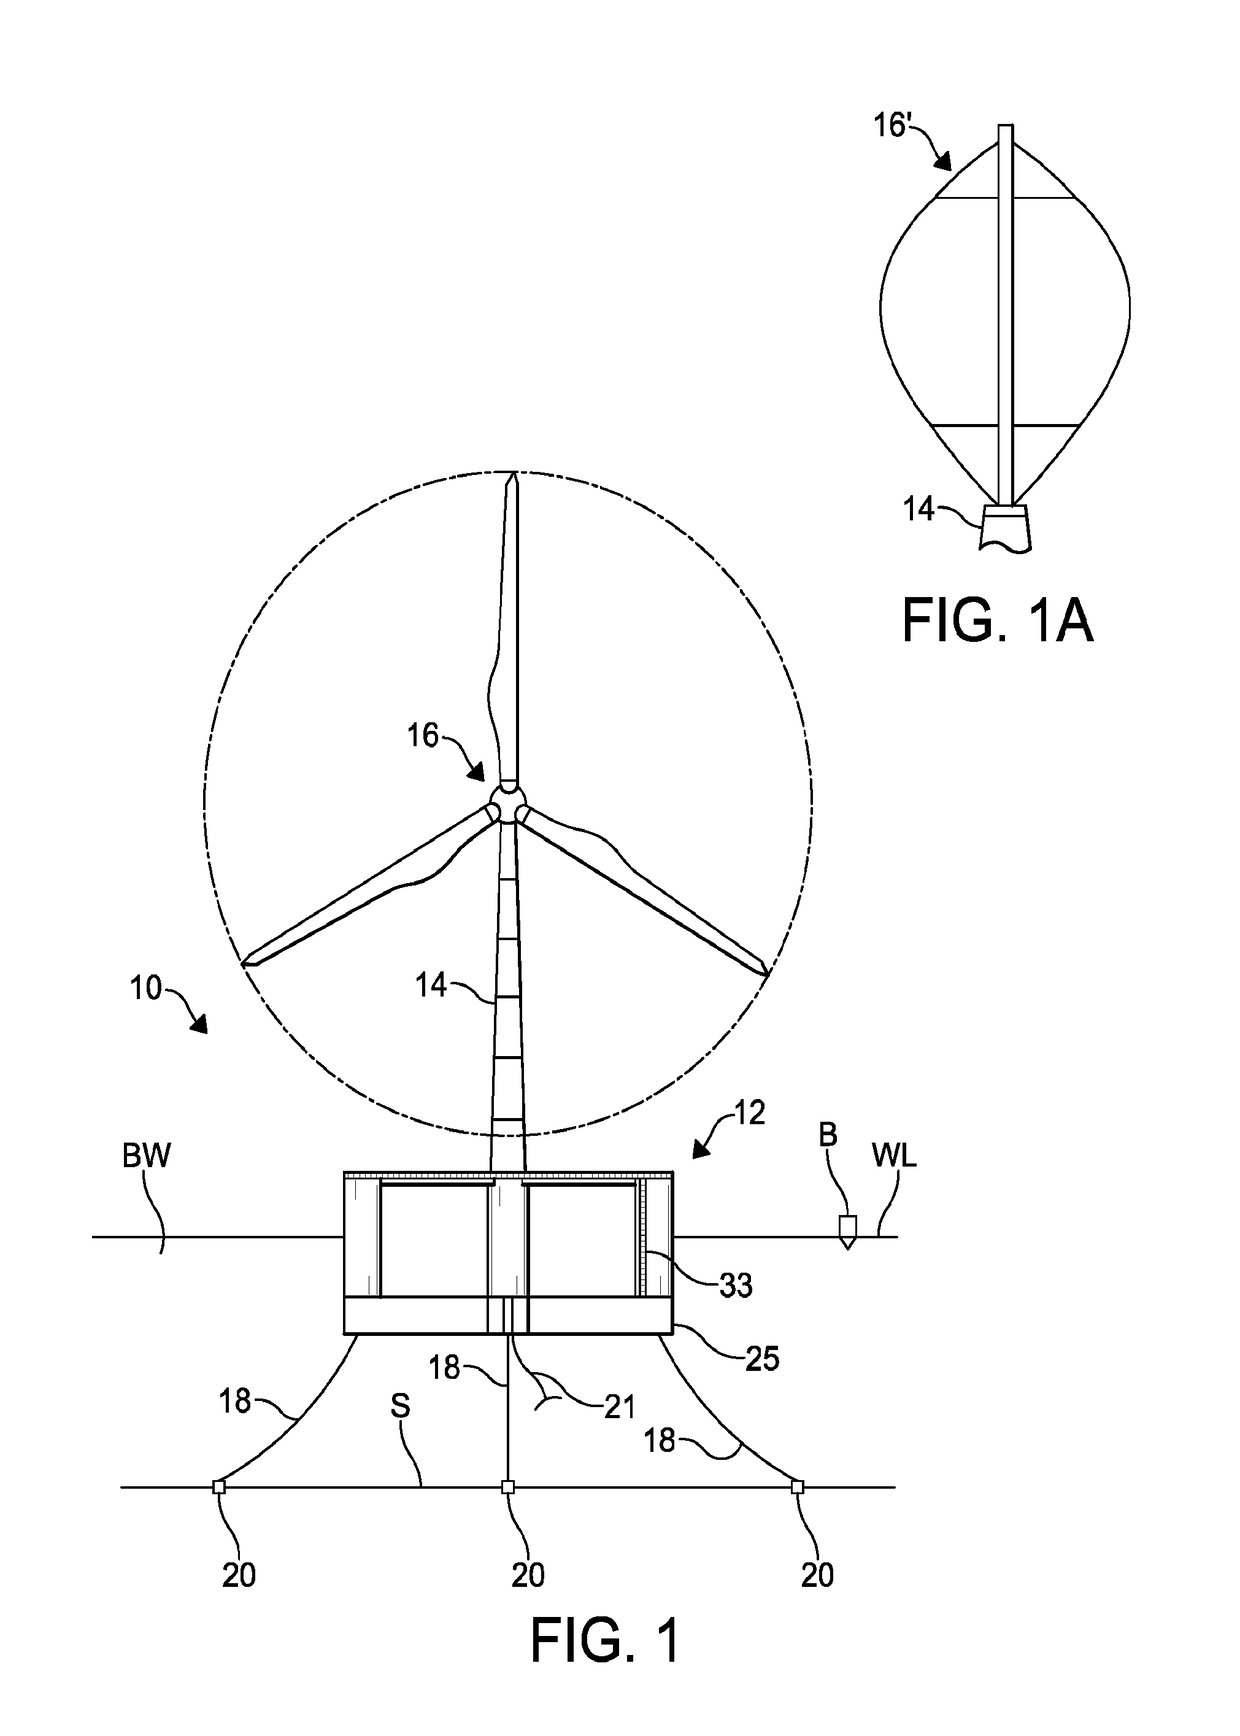 Method of construction, assembly, and launch of a floating wind turbine platform